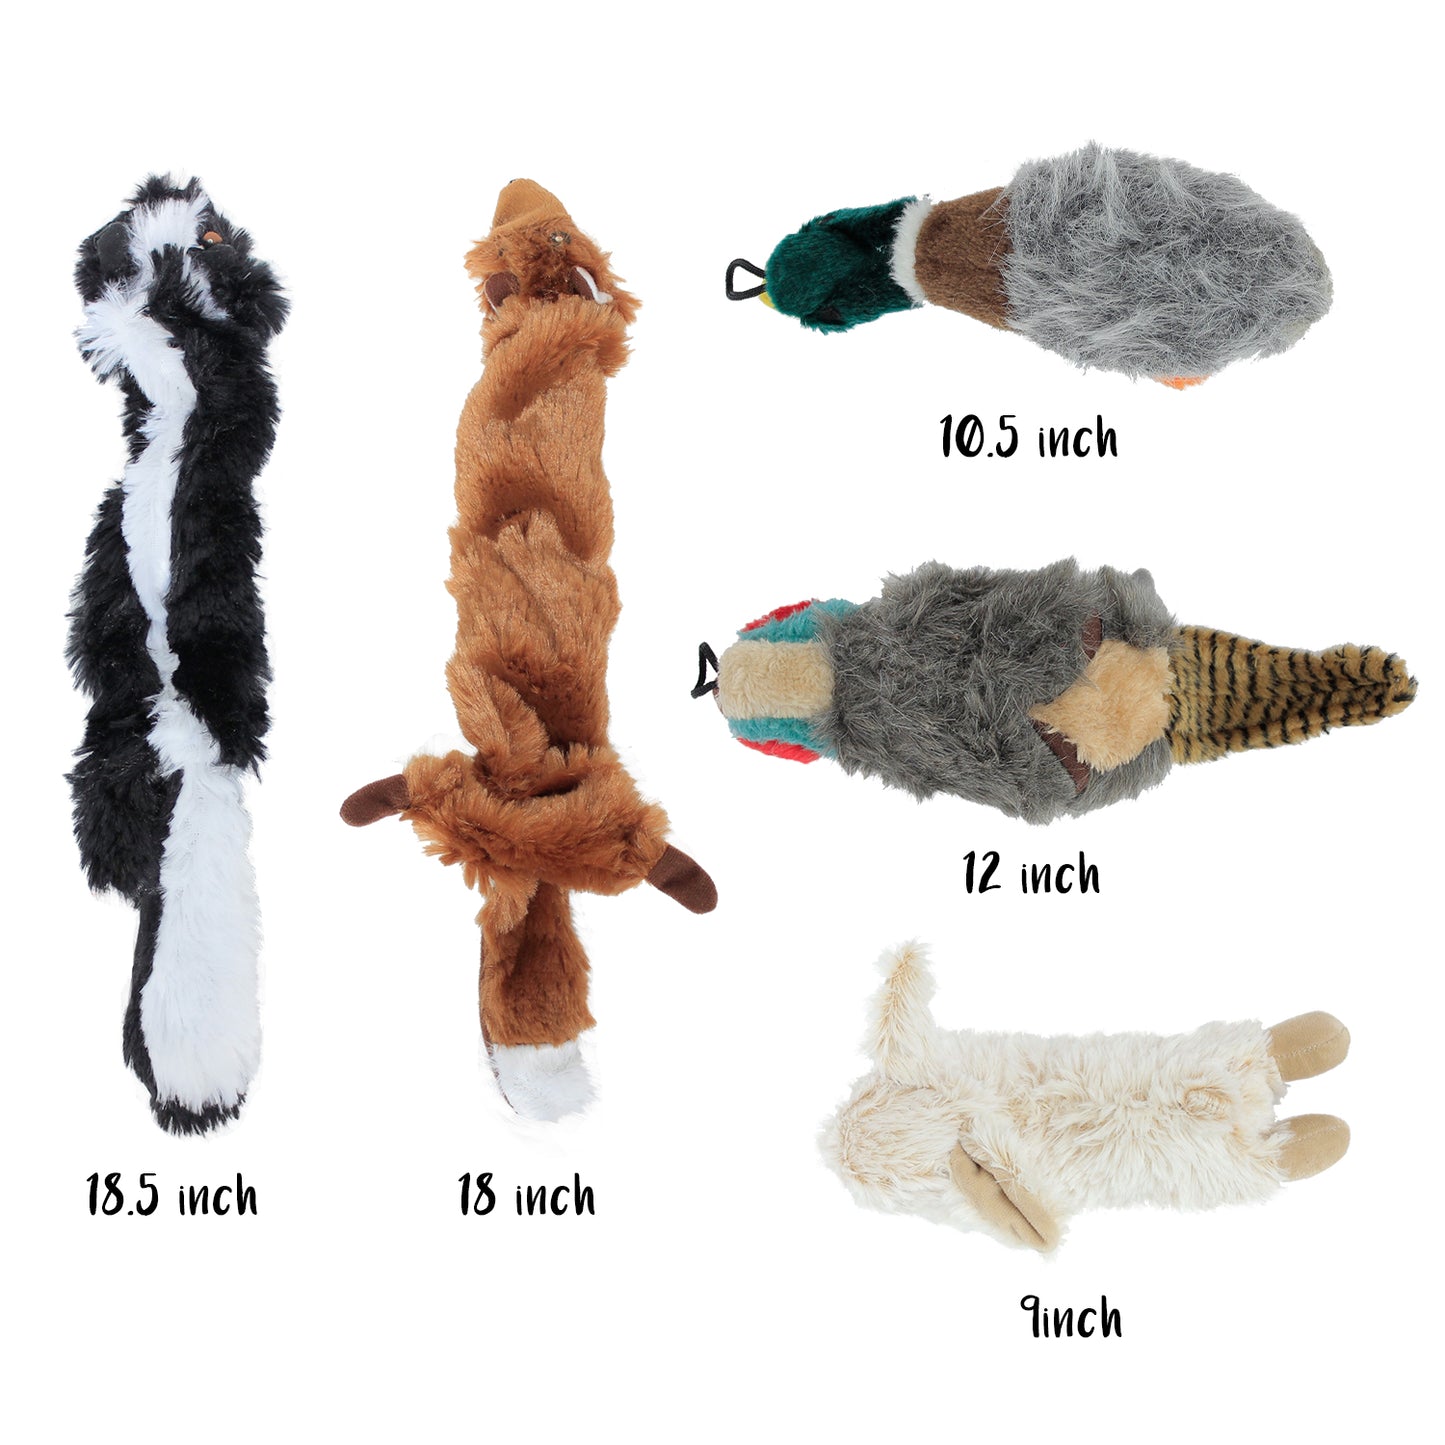 Interactive Dog Toys - Set of 5 Stuffed Toys - Multi-Pack Options